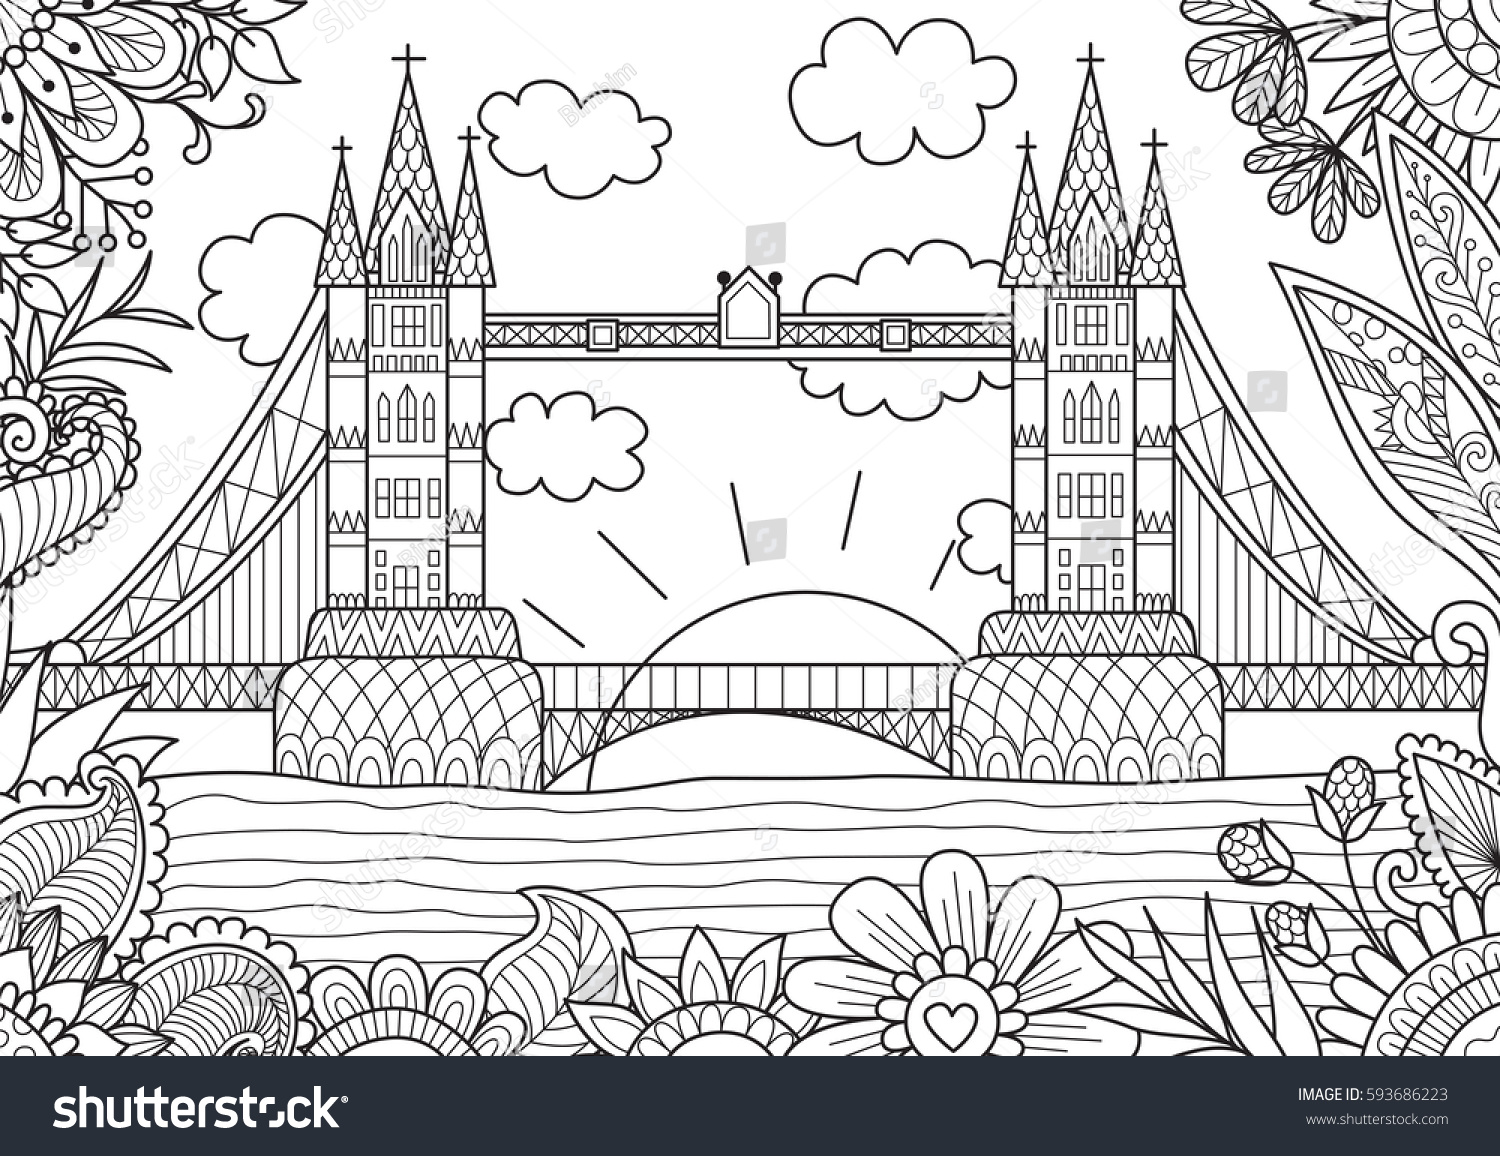 Spring london zendoodle design adult coloring stock vector royalty free